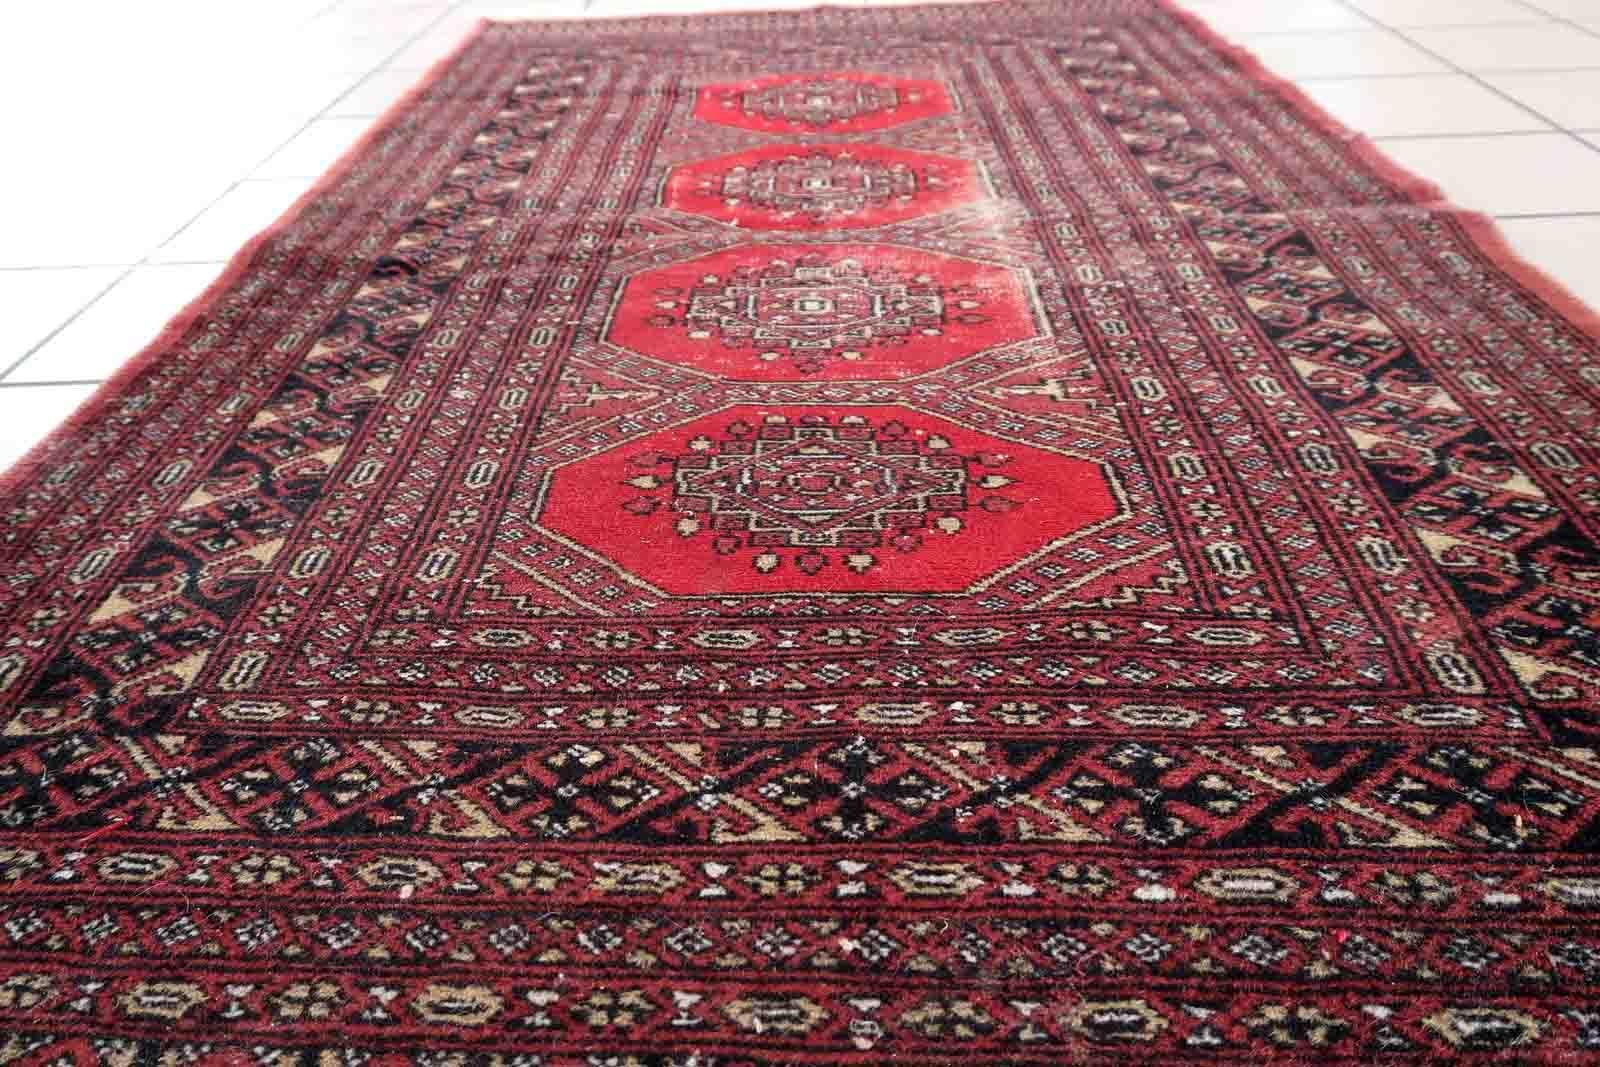 Handmade vintage Uzbek Bukhara rug in classic design. The rug is from the end of 20th century in distressed condition.

-condition: original good,

-circa: 1970s,

-size: 3' x 5.3' (94cm x 163cm),

-material: wool,

-country of origin: